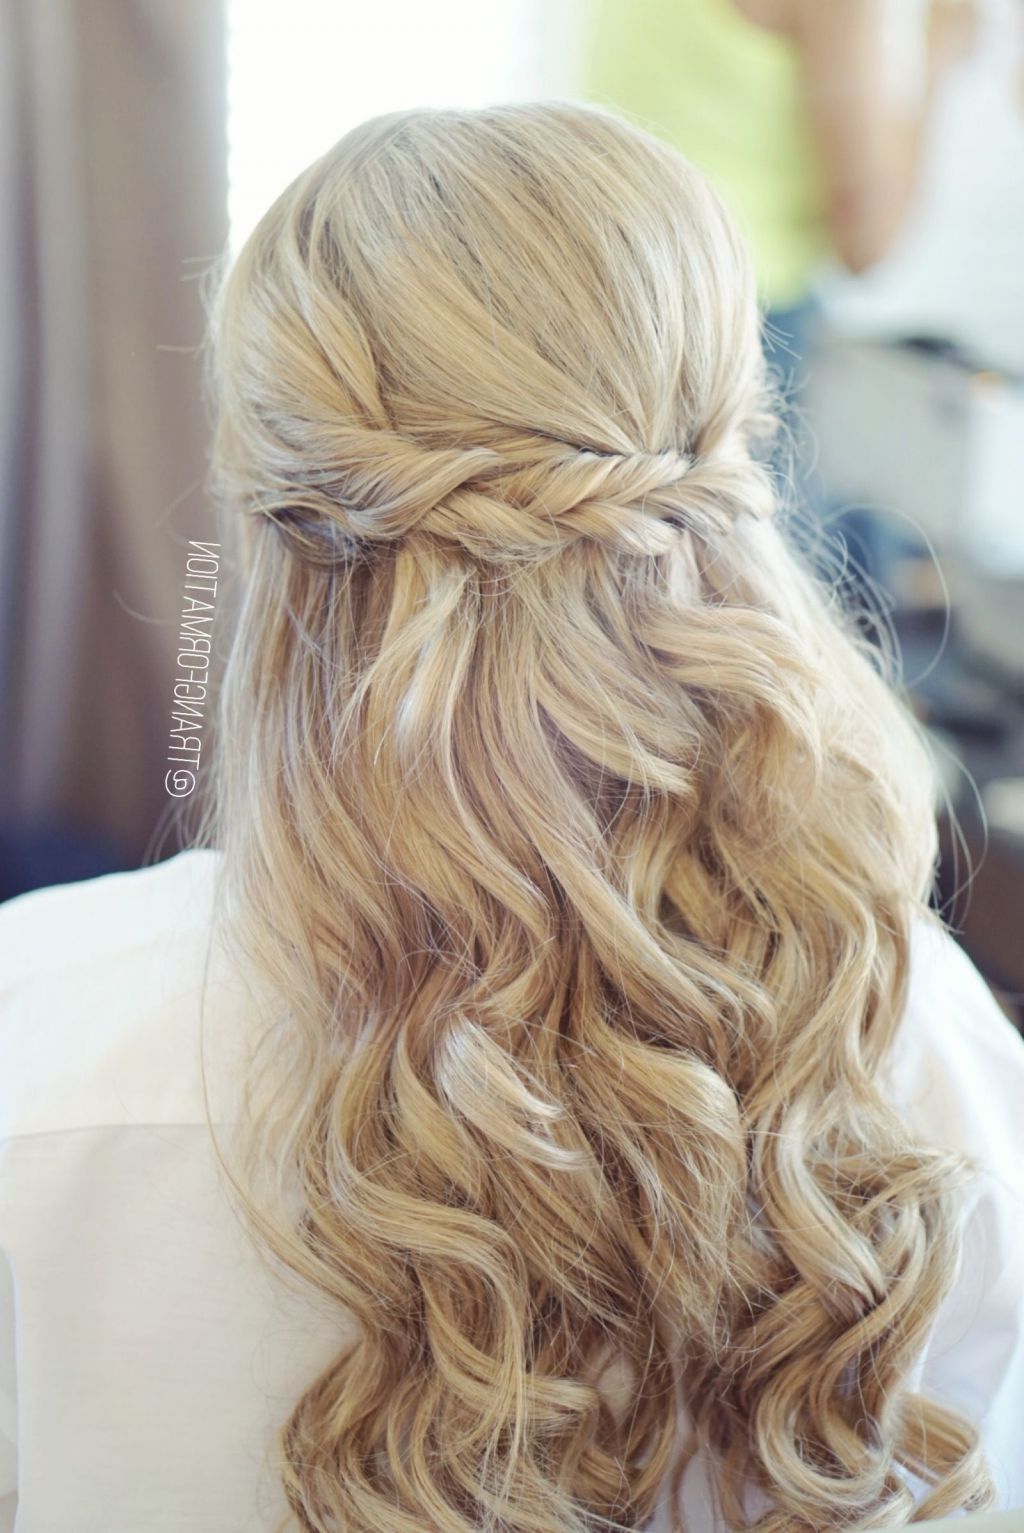 Well Known Half Up Half Down Wedding Hairstyles Within √ 24+ Nice Wedding Hairstyles Half Up: Half Up Half Down, Bridal (View 13 of 15)